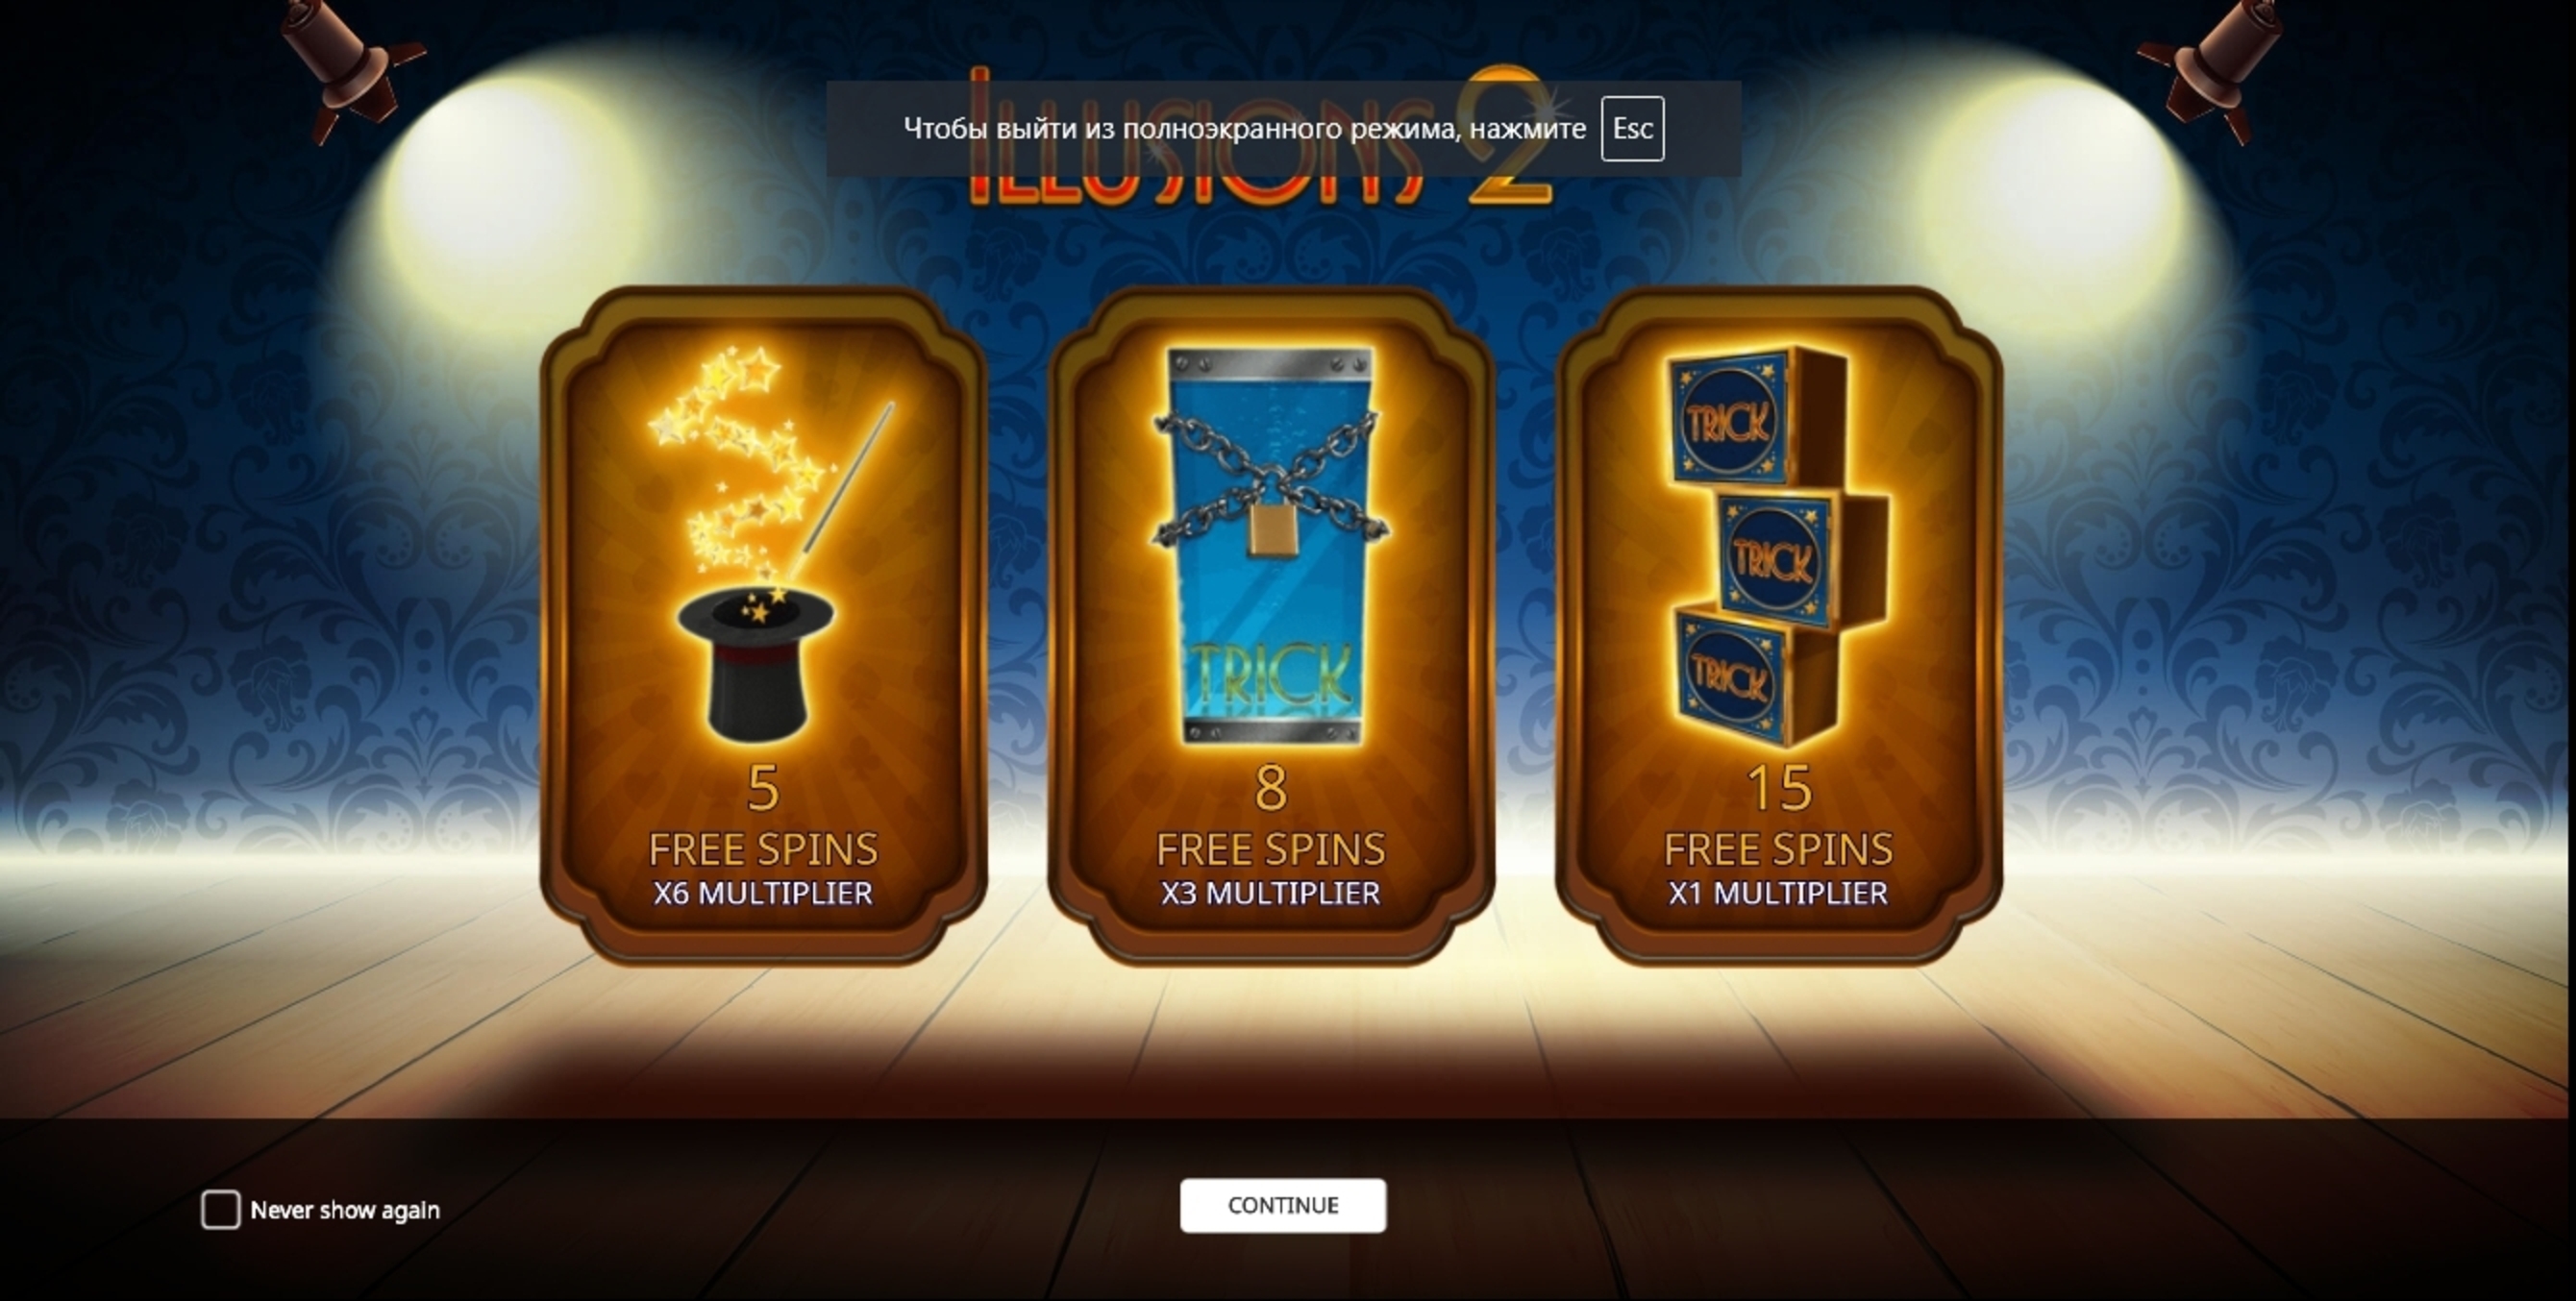 Play Illusions 2 Free Casino Slot Game by iSoftBet